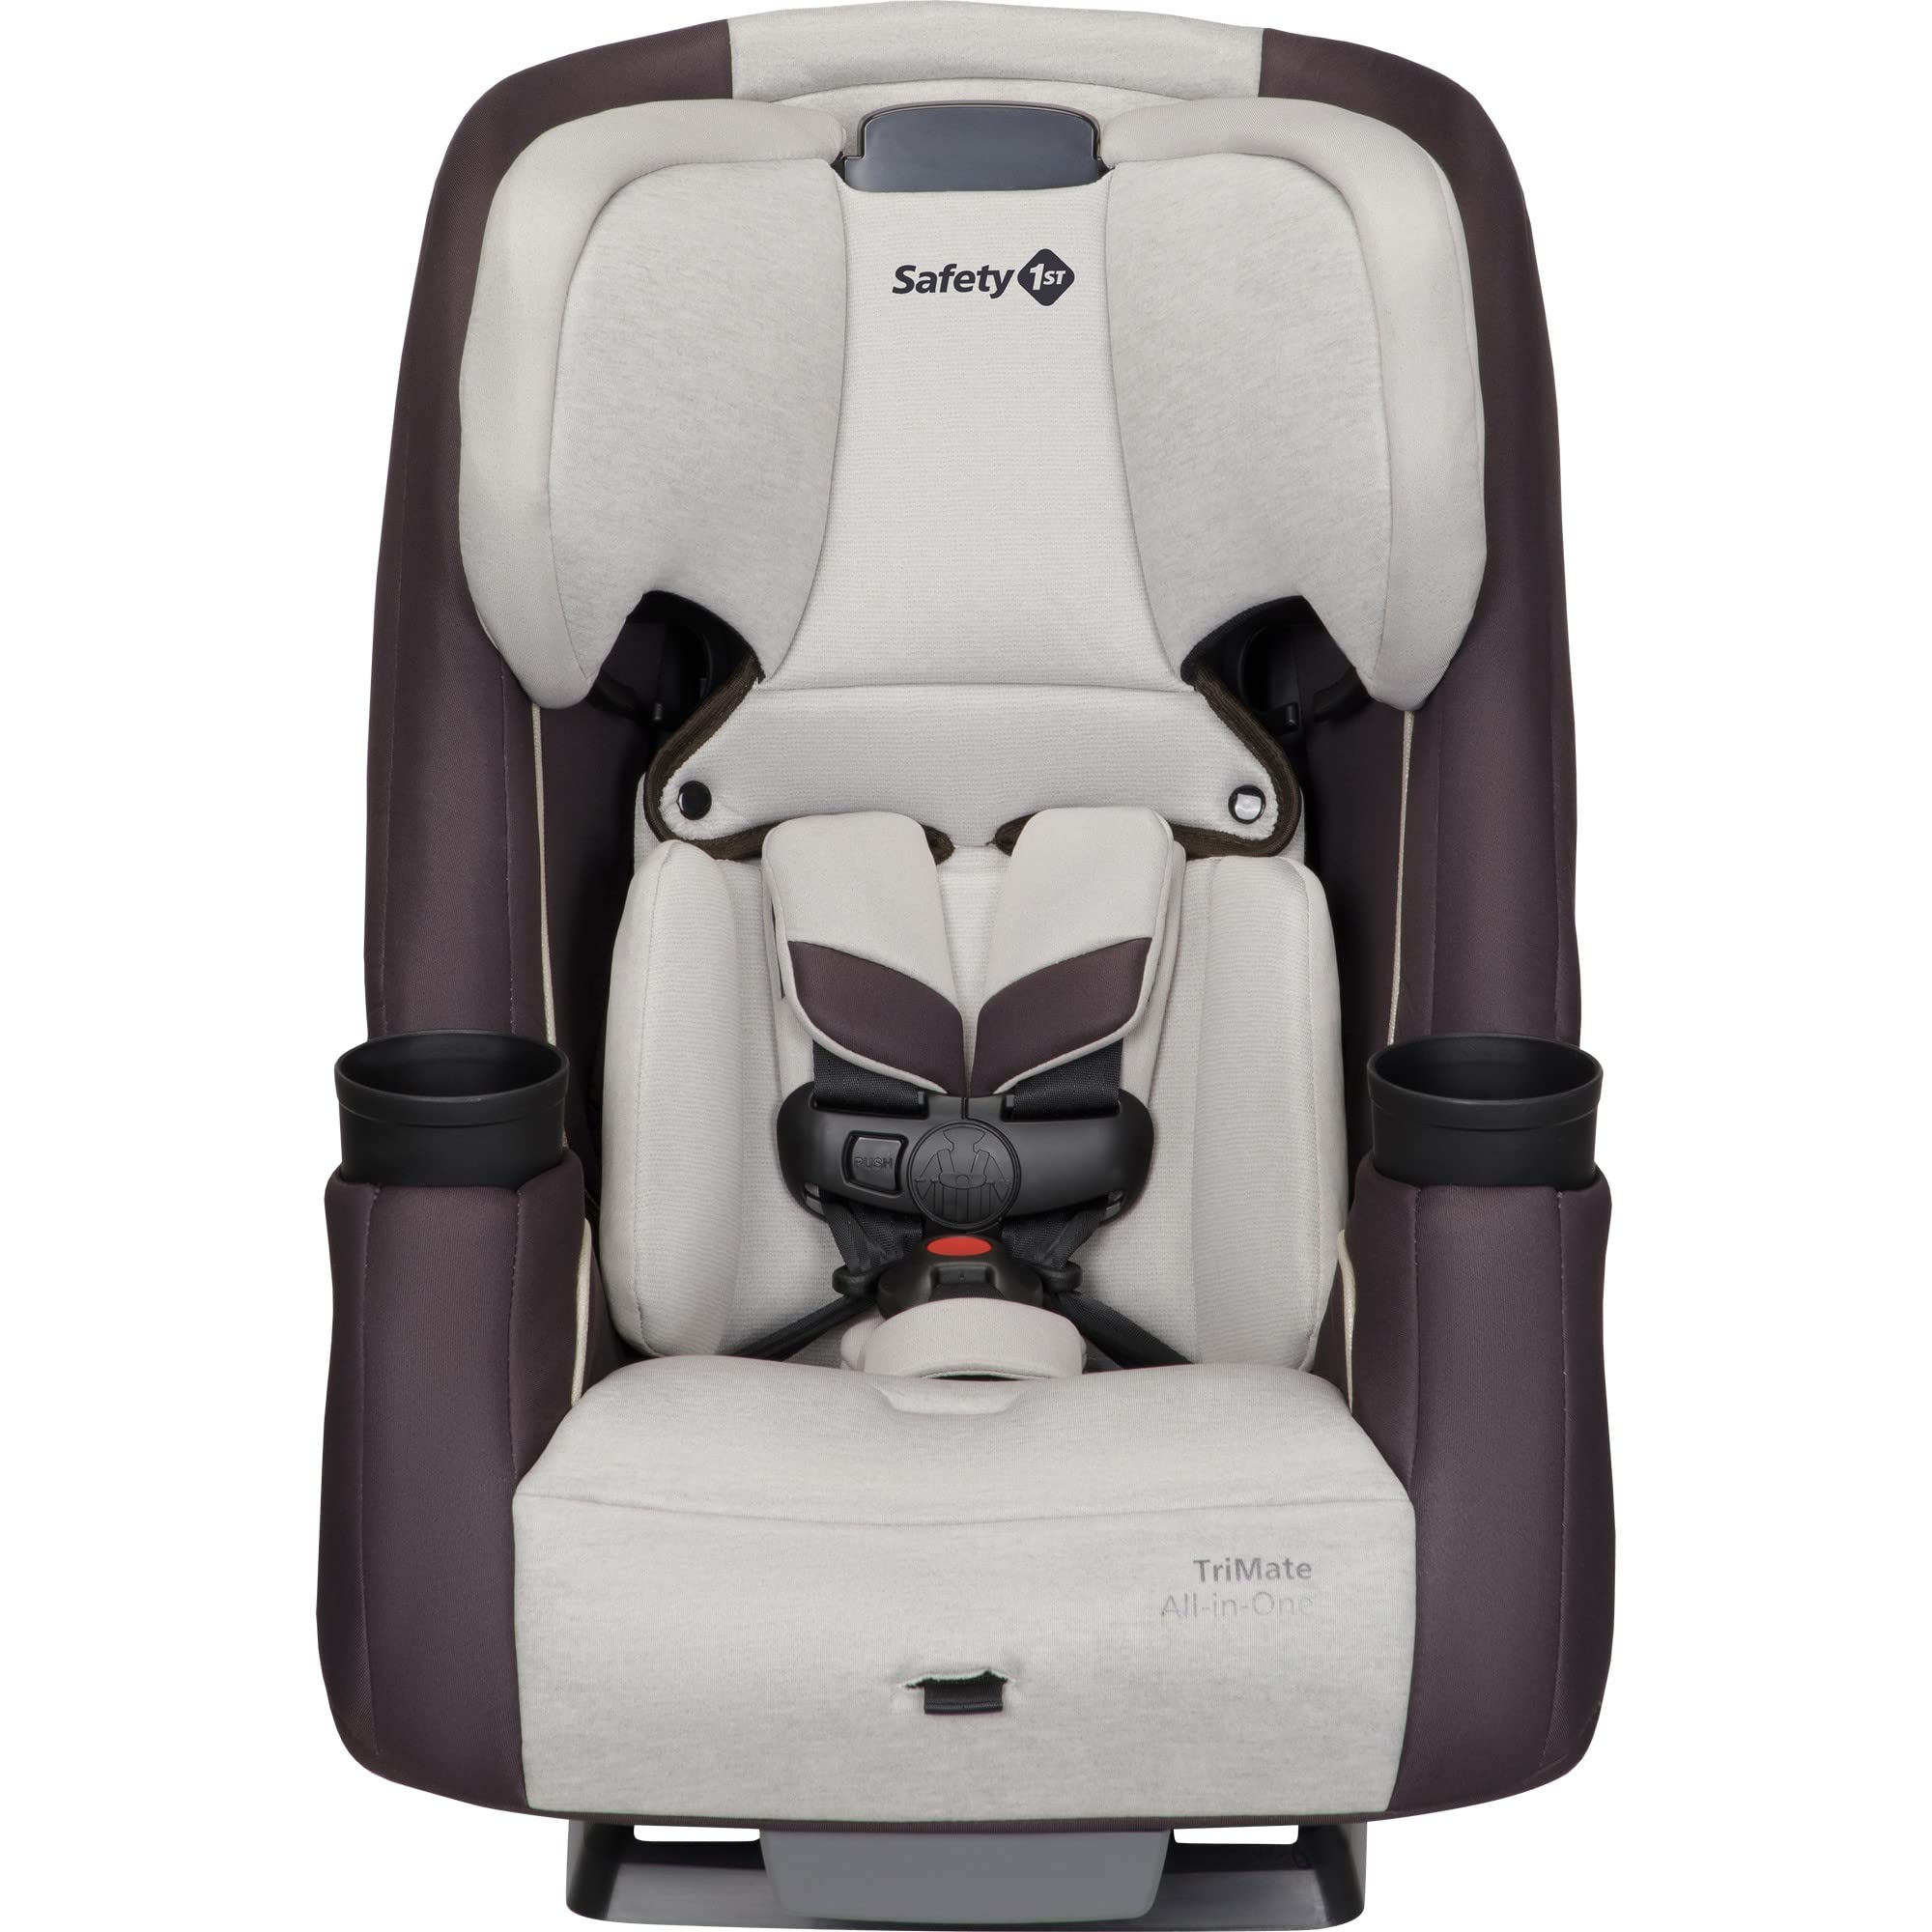 Safety 1st TriMate All-in-One Convertible Car Seat, All-in-one Convertible with Rear-Facing, Forward-Facing, and Belt-Positioning Booster, Dunes Edge